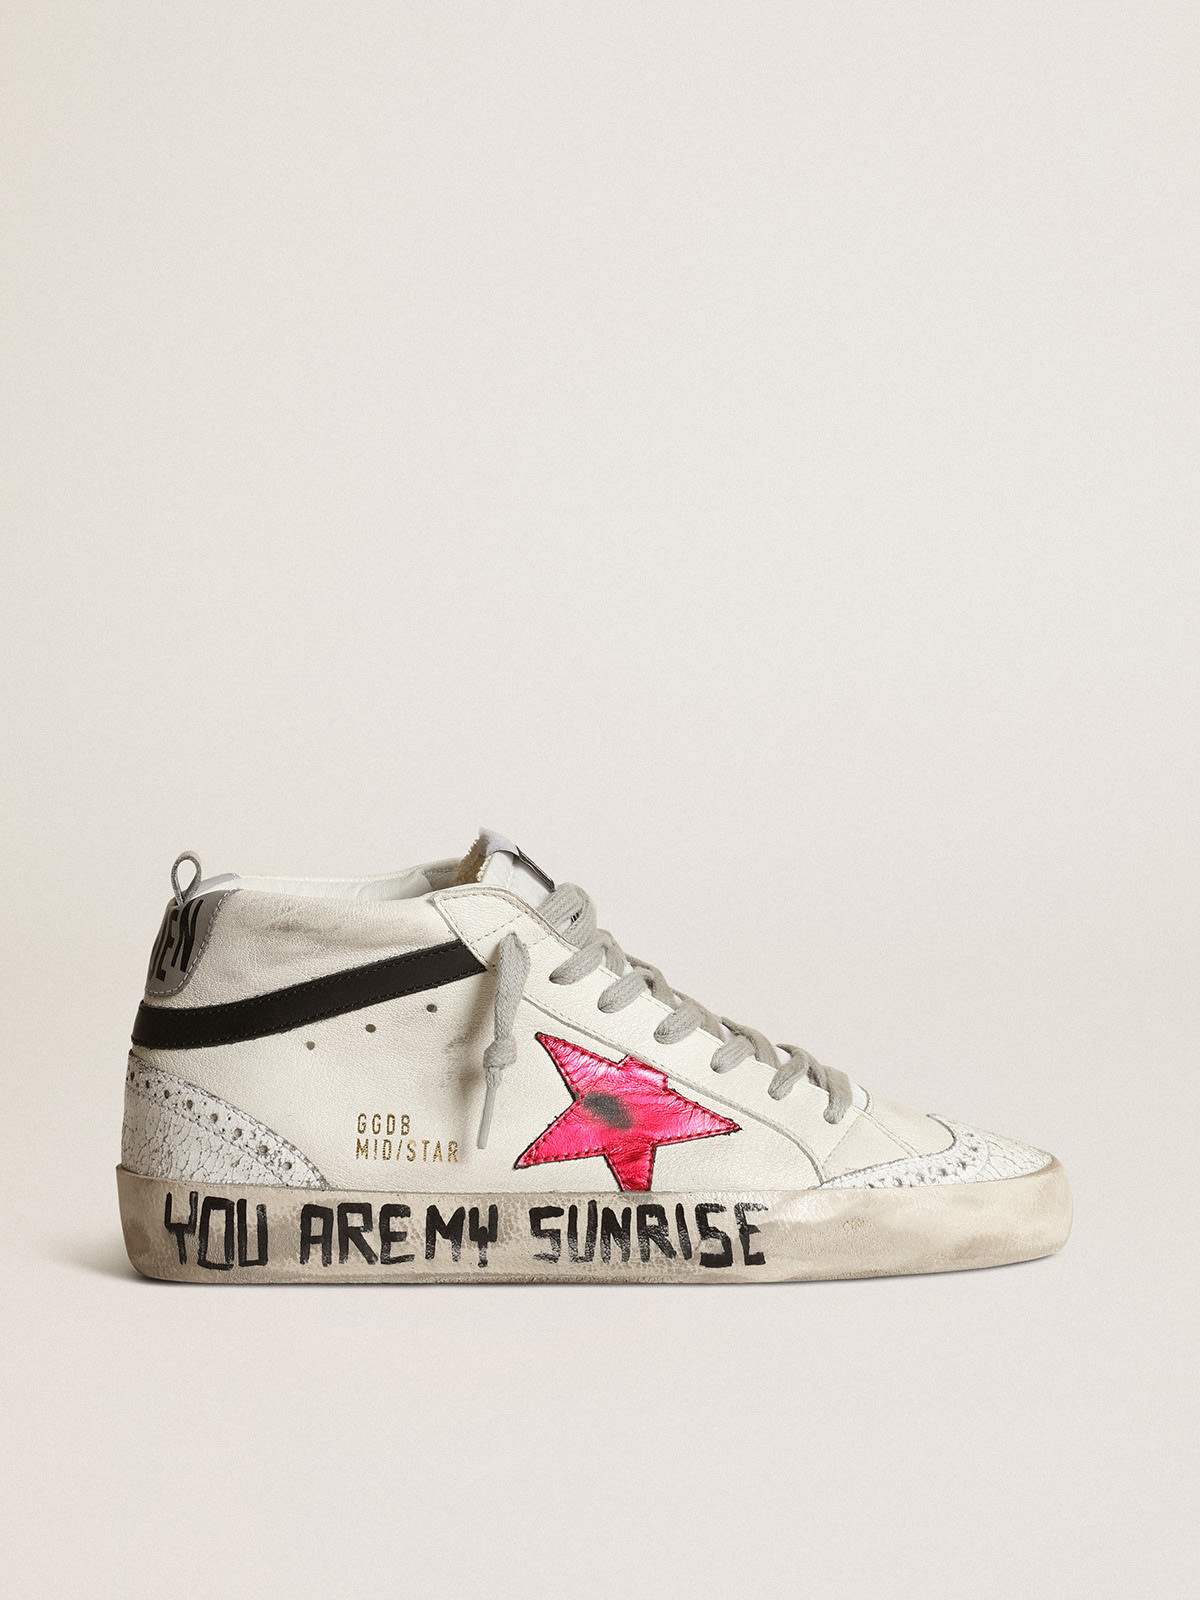 Golden Goose Outlet Mid Star with a pink laminated leather star and black flash